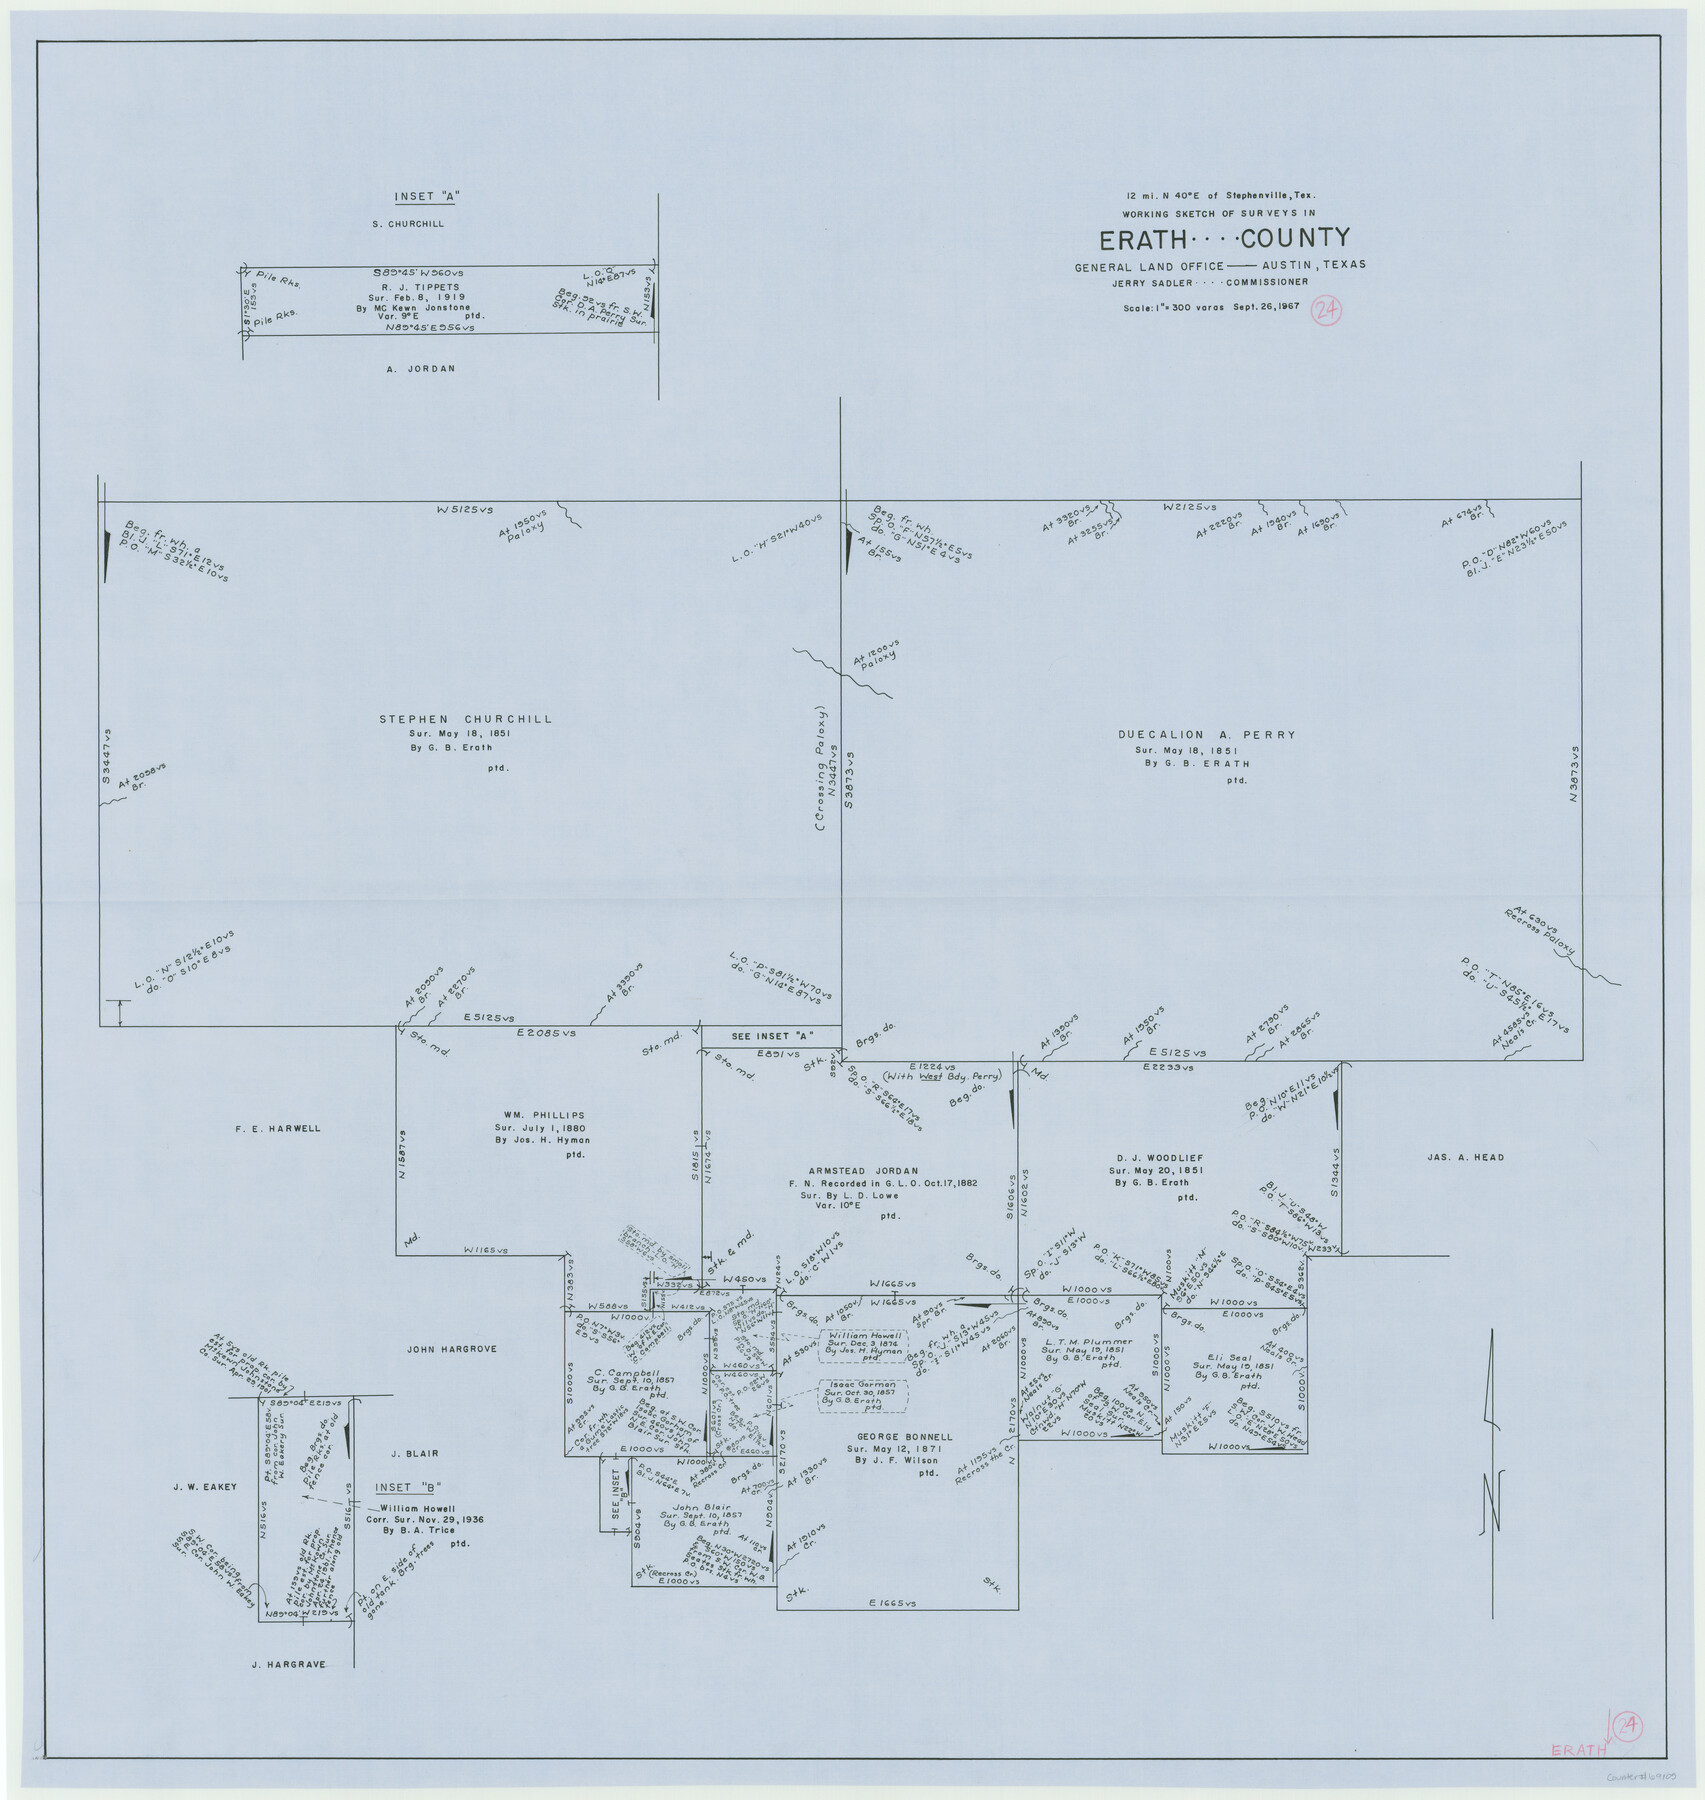 69105, Erath County Working Sketch 24, General Map Collection